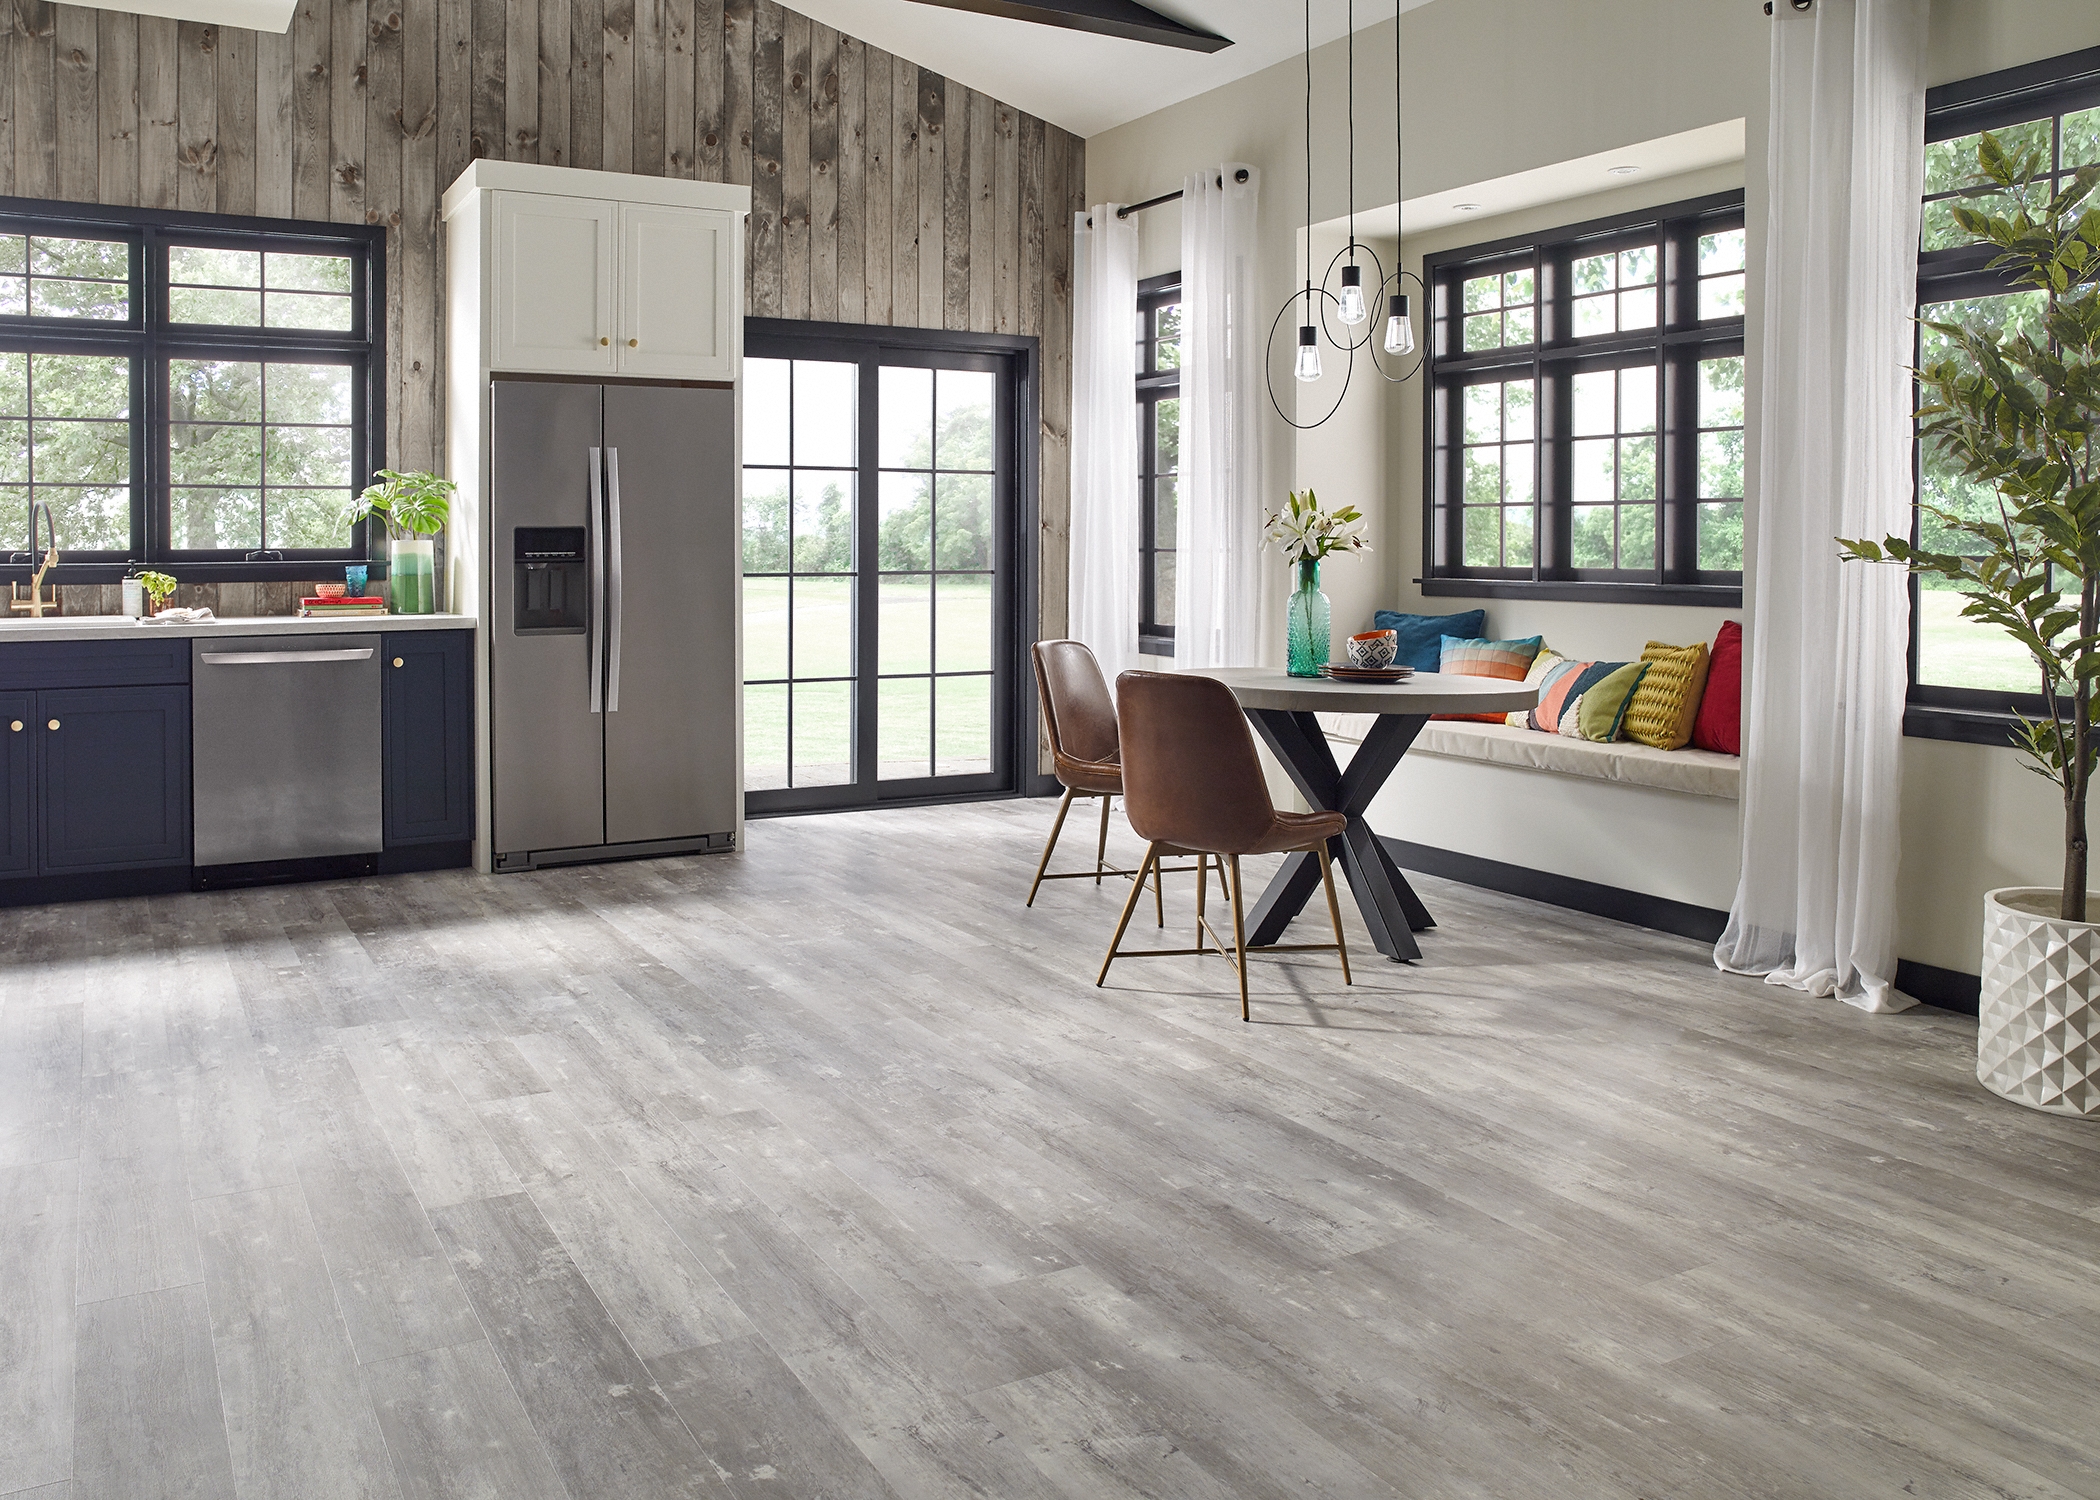 gray rigid vinyl plank in open concept kitchen and dining with blue cabinets plus stainless steel appliances and round dining table with brown dining chairs and bench seating